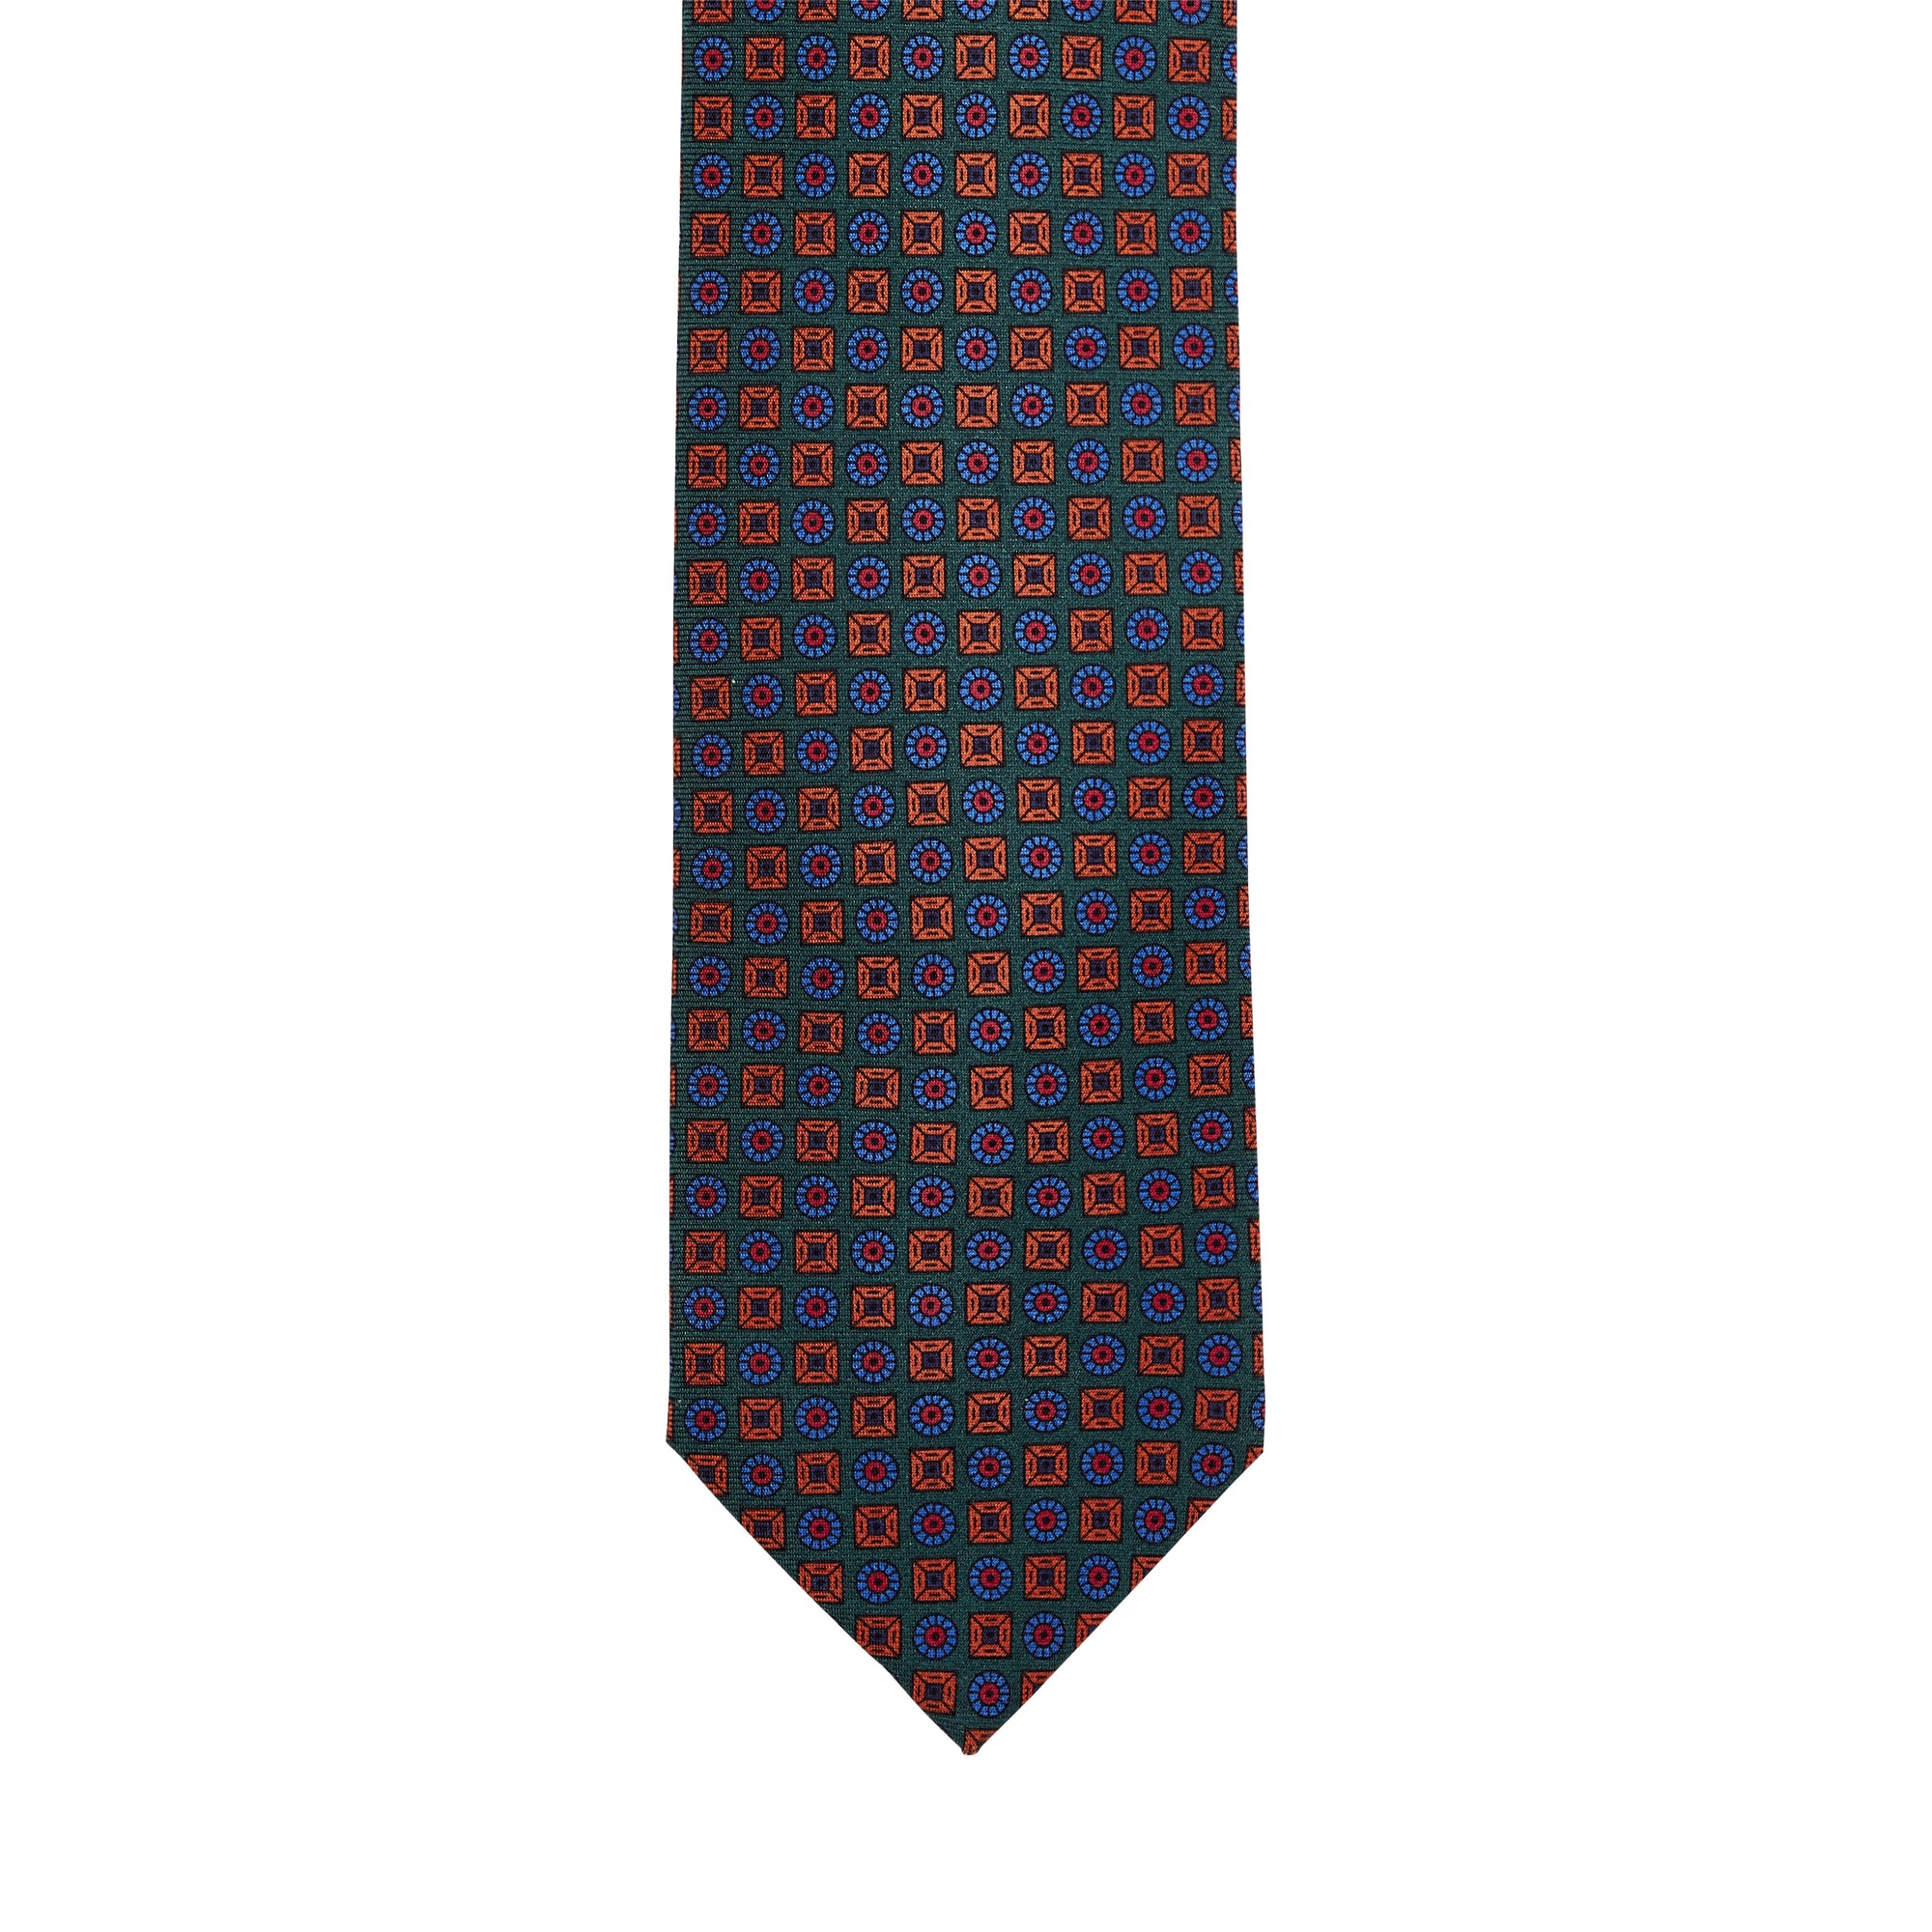 A Sovereign Grade Green Ancient Madder Tie from KirbyAllison.com with a red and blue pattern.